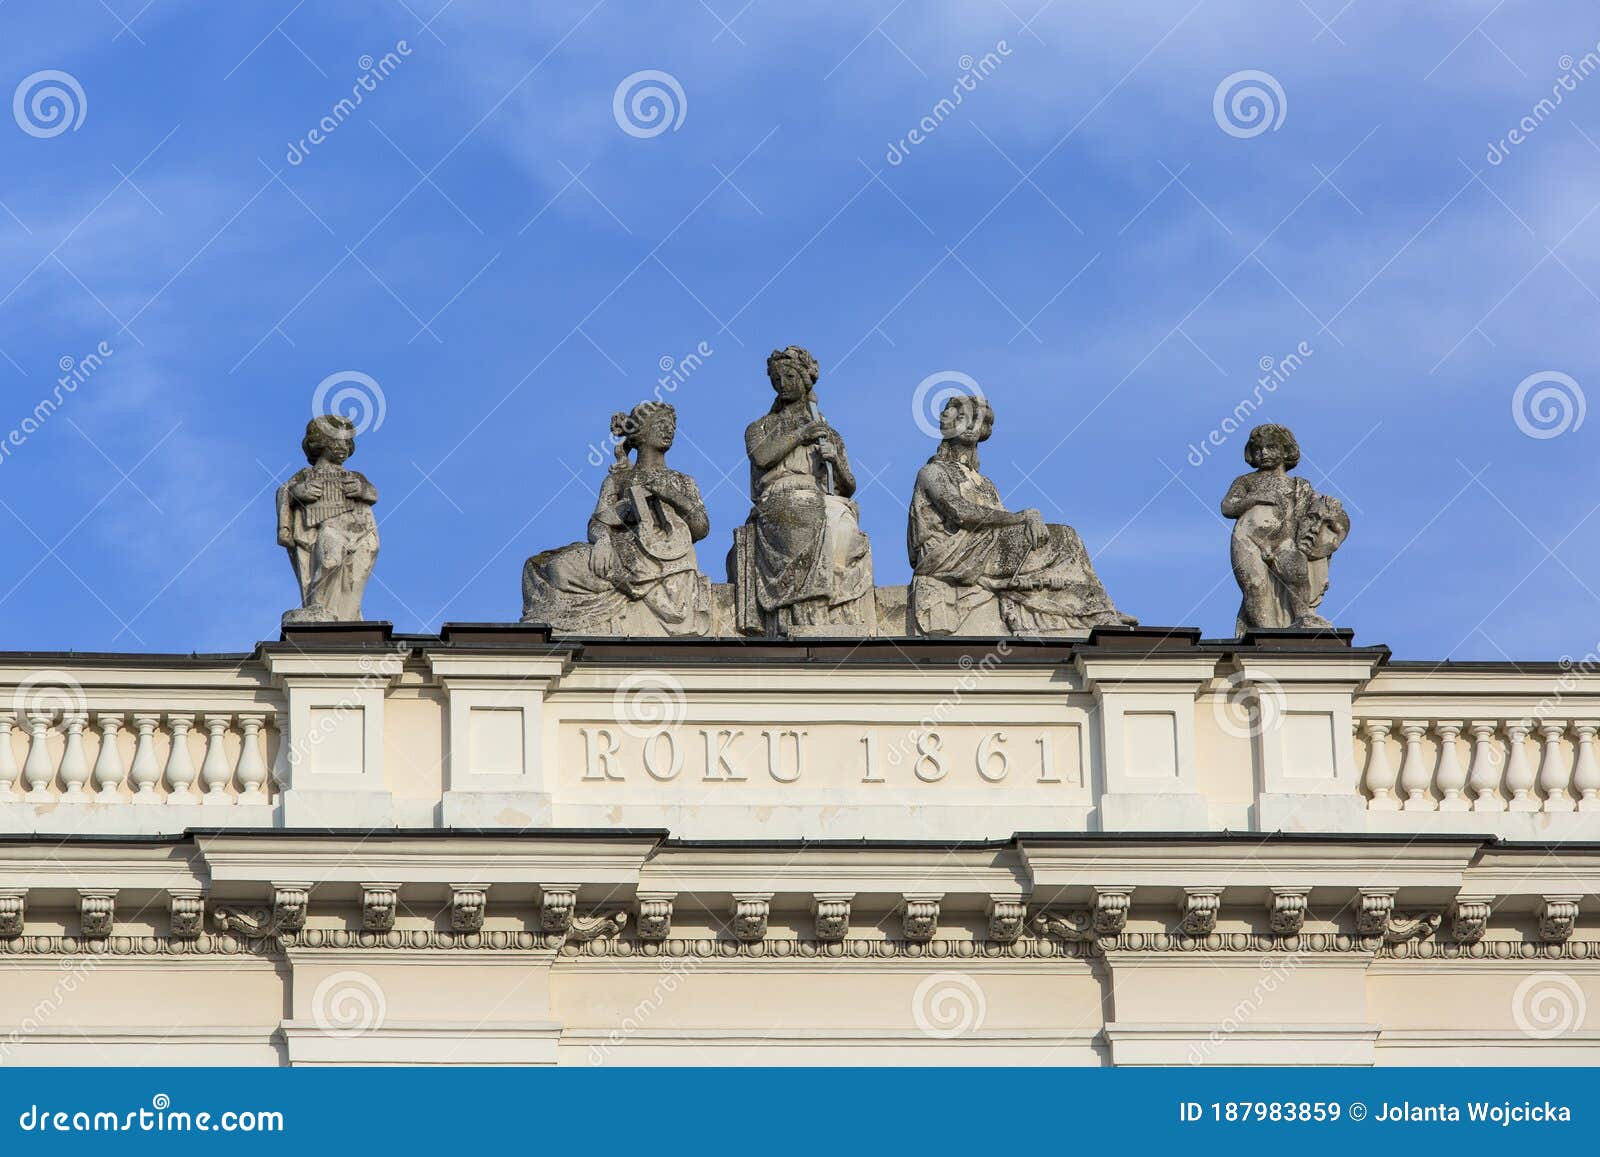 sculptures at the top of the building on the krakowskie przedmiescie street, warsaw, poland